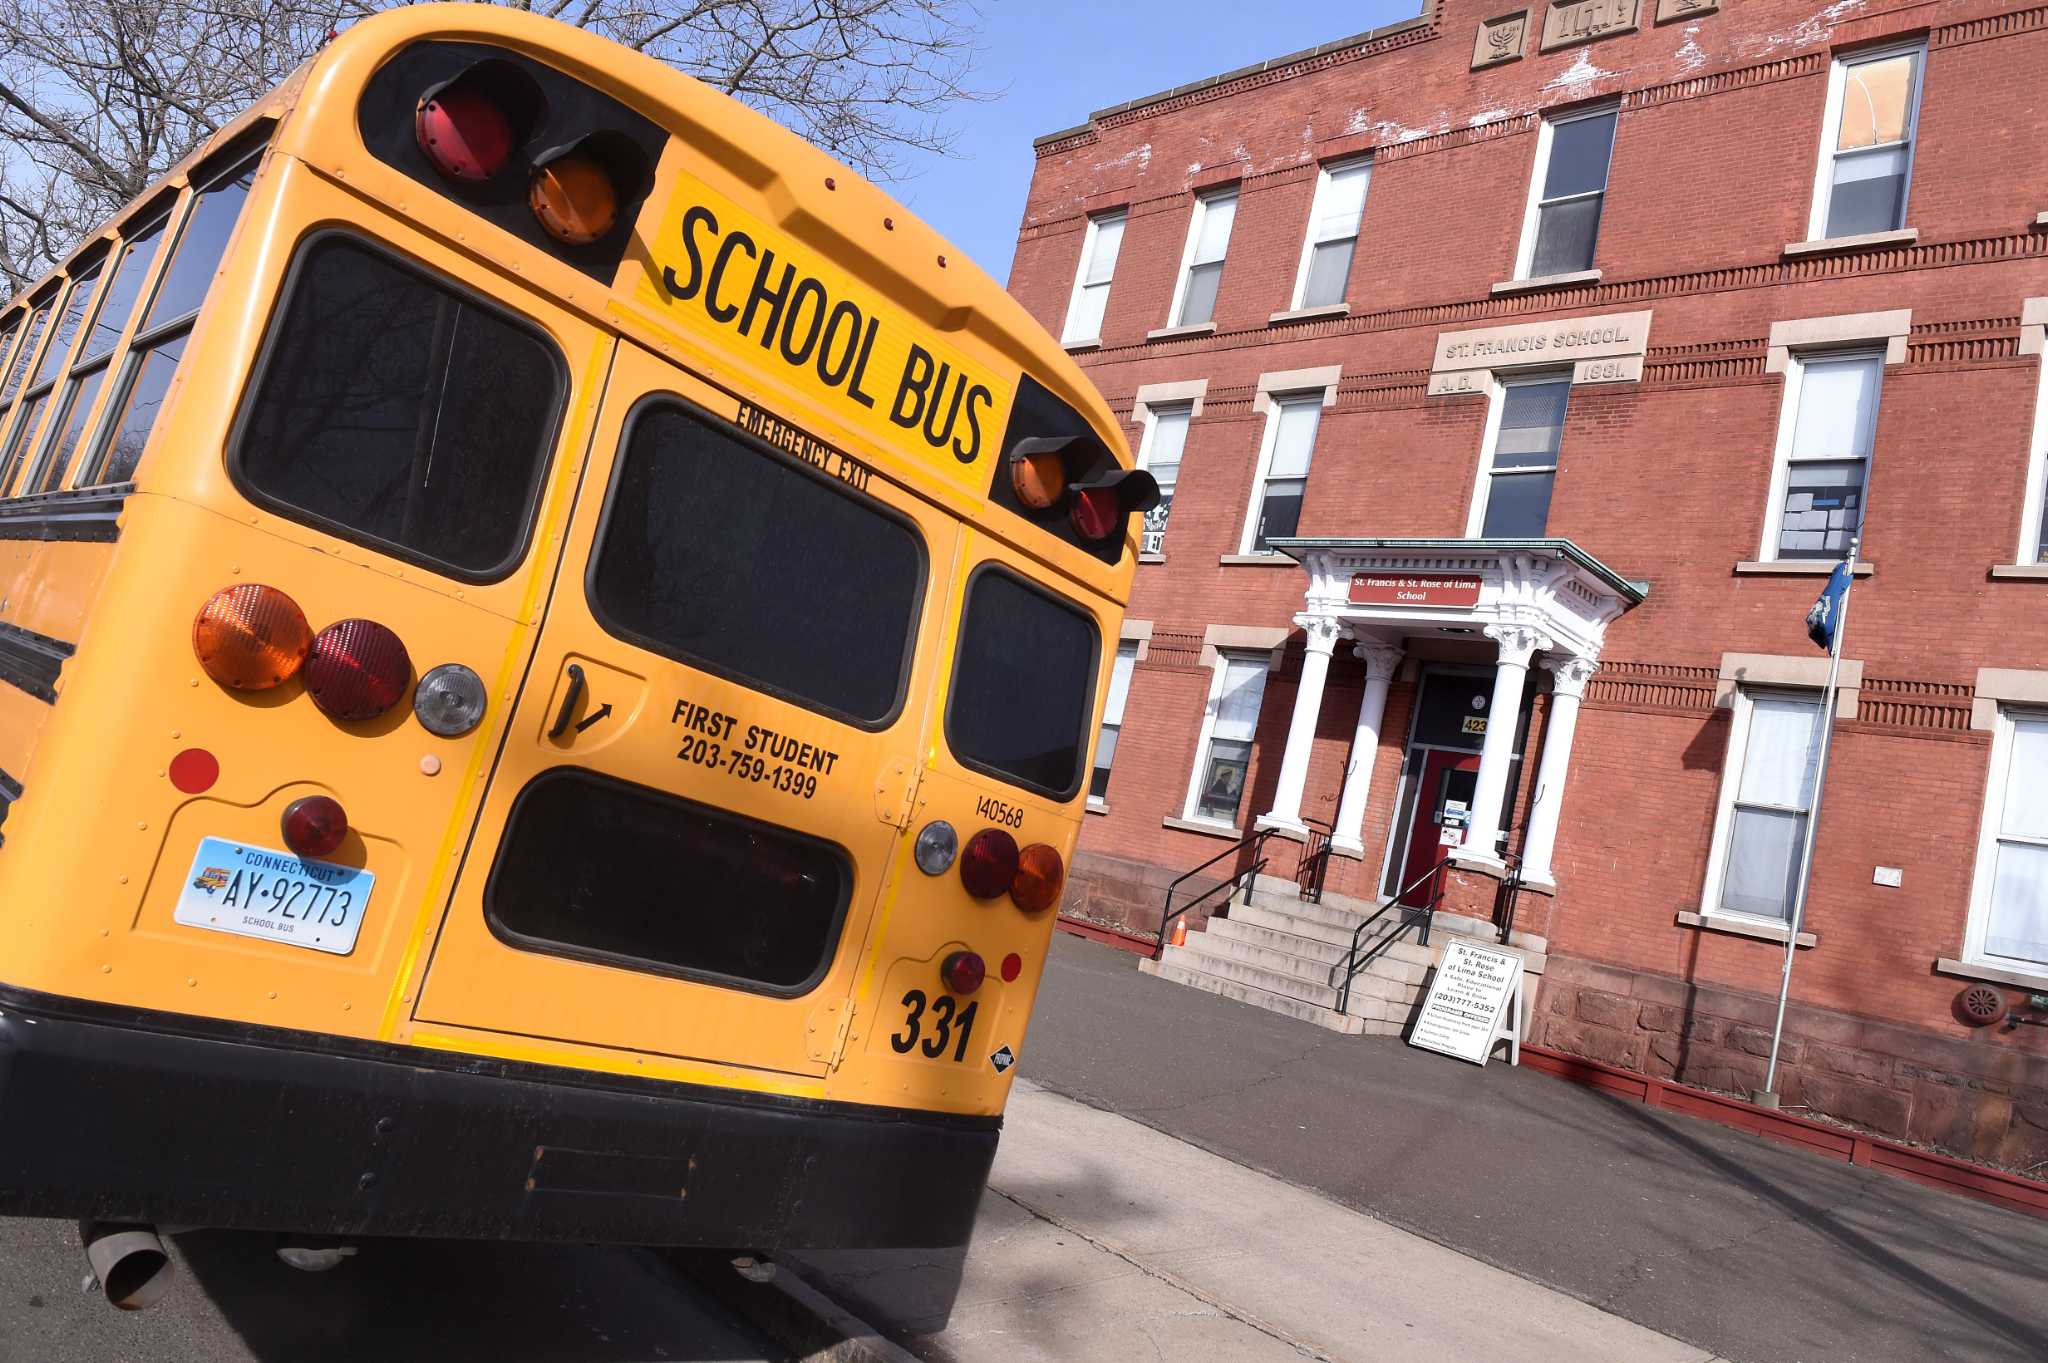 ‘Their two strikes’: Officials say New Haven school bus shutdown caused